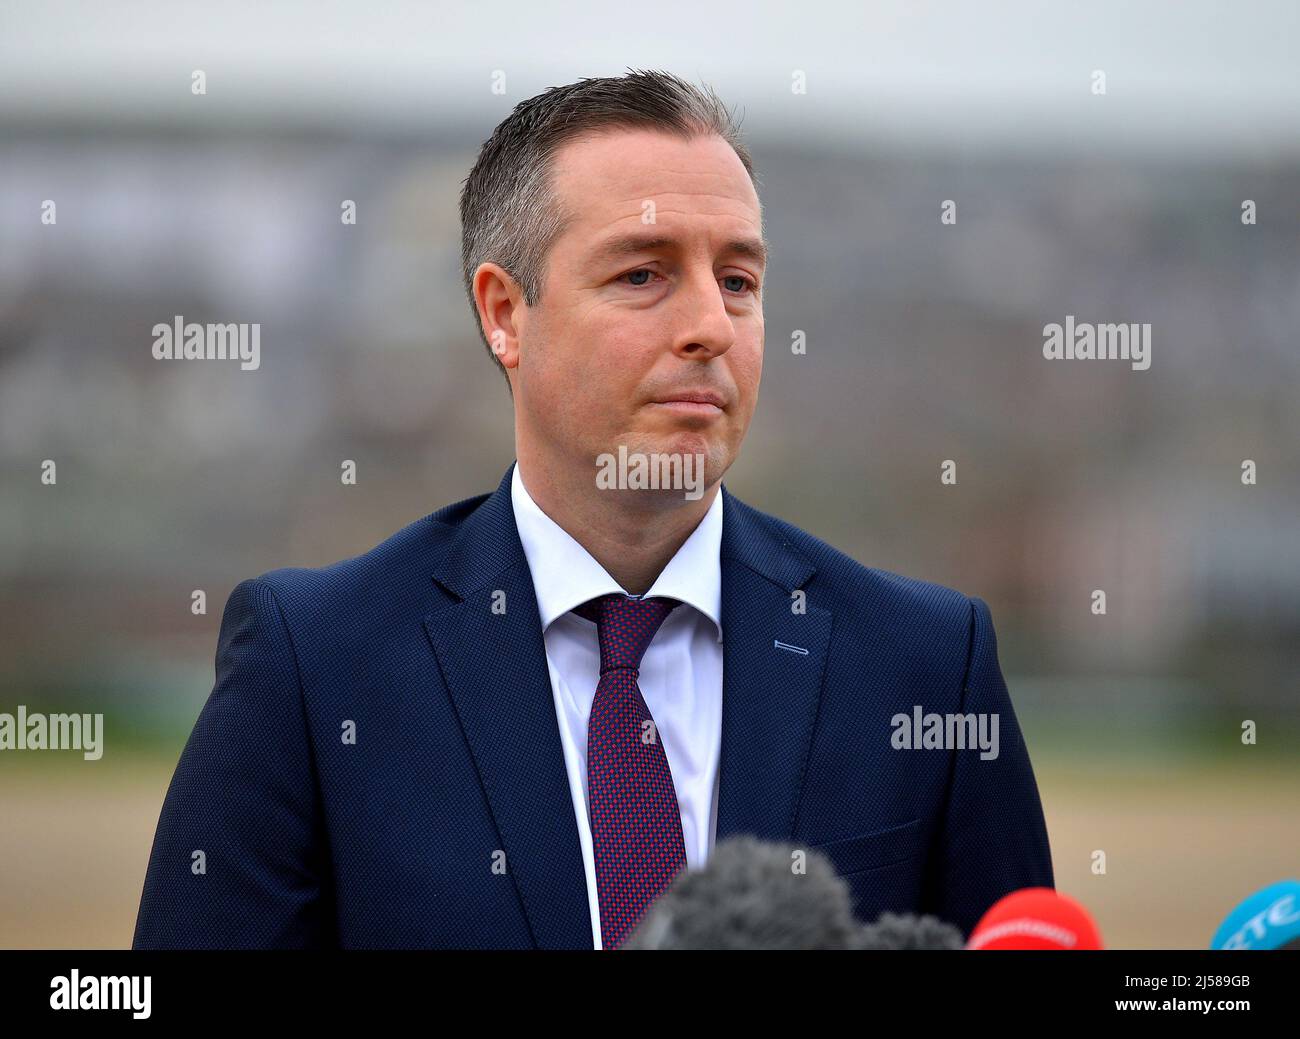 Paul Givan is a Unionist politician from Northern Ireland representing the Democratic Unionist Party (DUP). Givan served as First Minister of Northern Ireland from June 2021 to February 2022. ©George Sweeney / Alamy Stock Photo Stock Photo